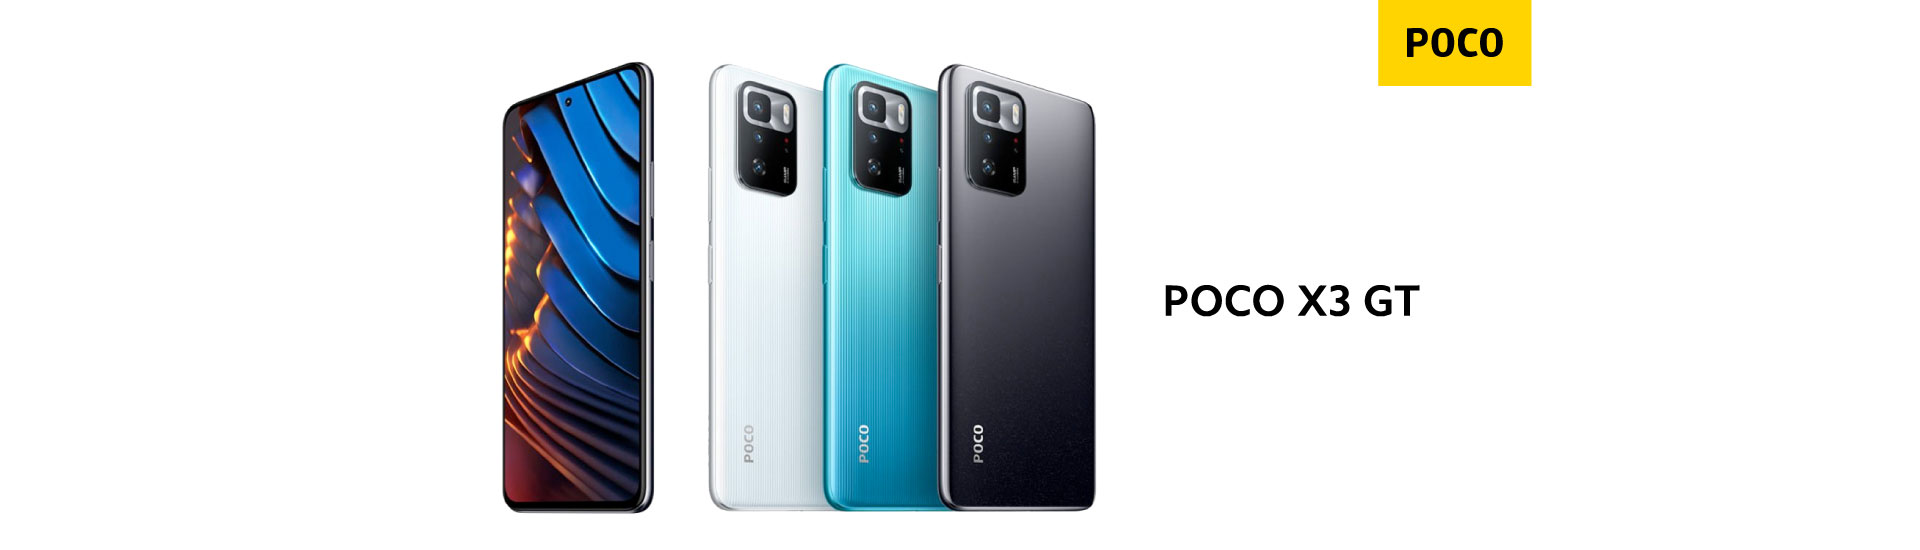 POCO X3 GT 5G add-on $60/mth up upon SIM Subscription/contract renewal